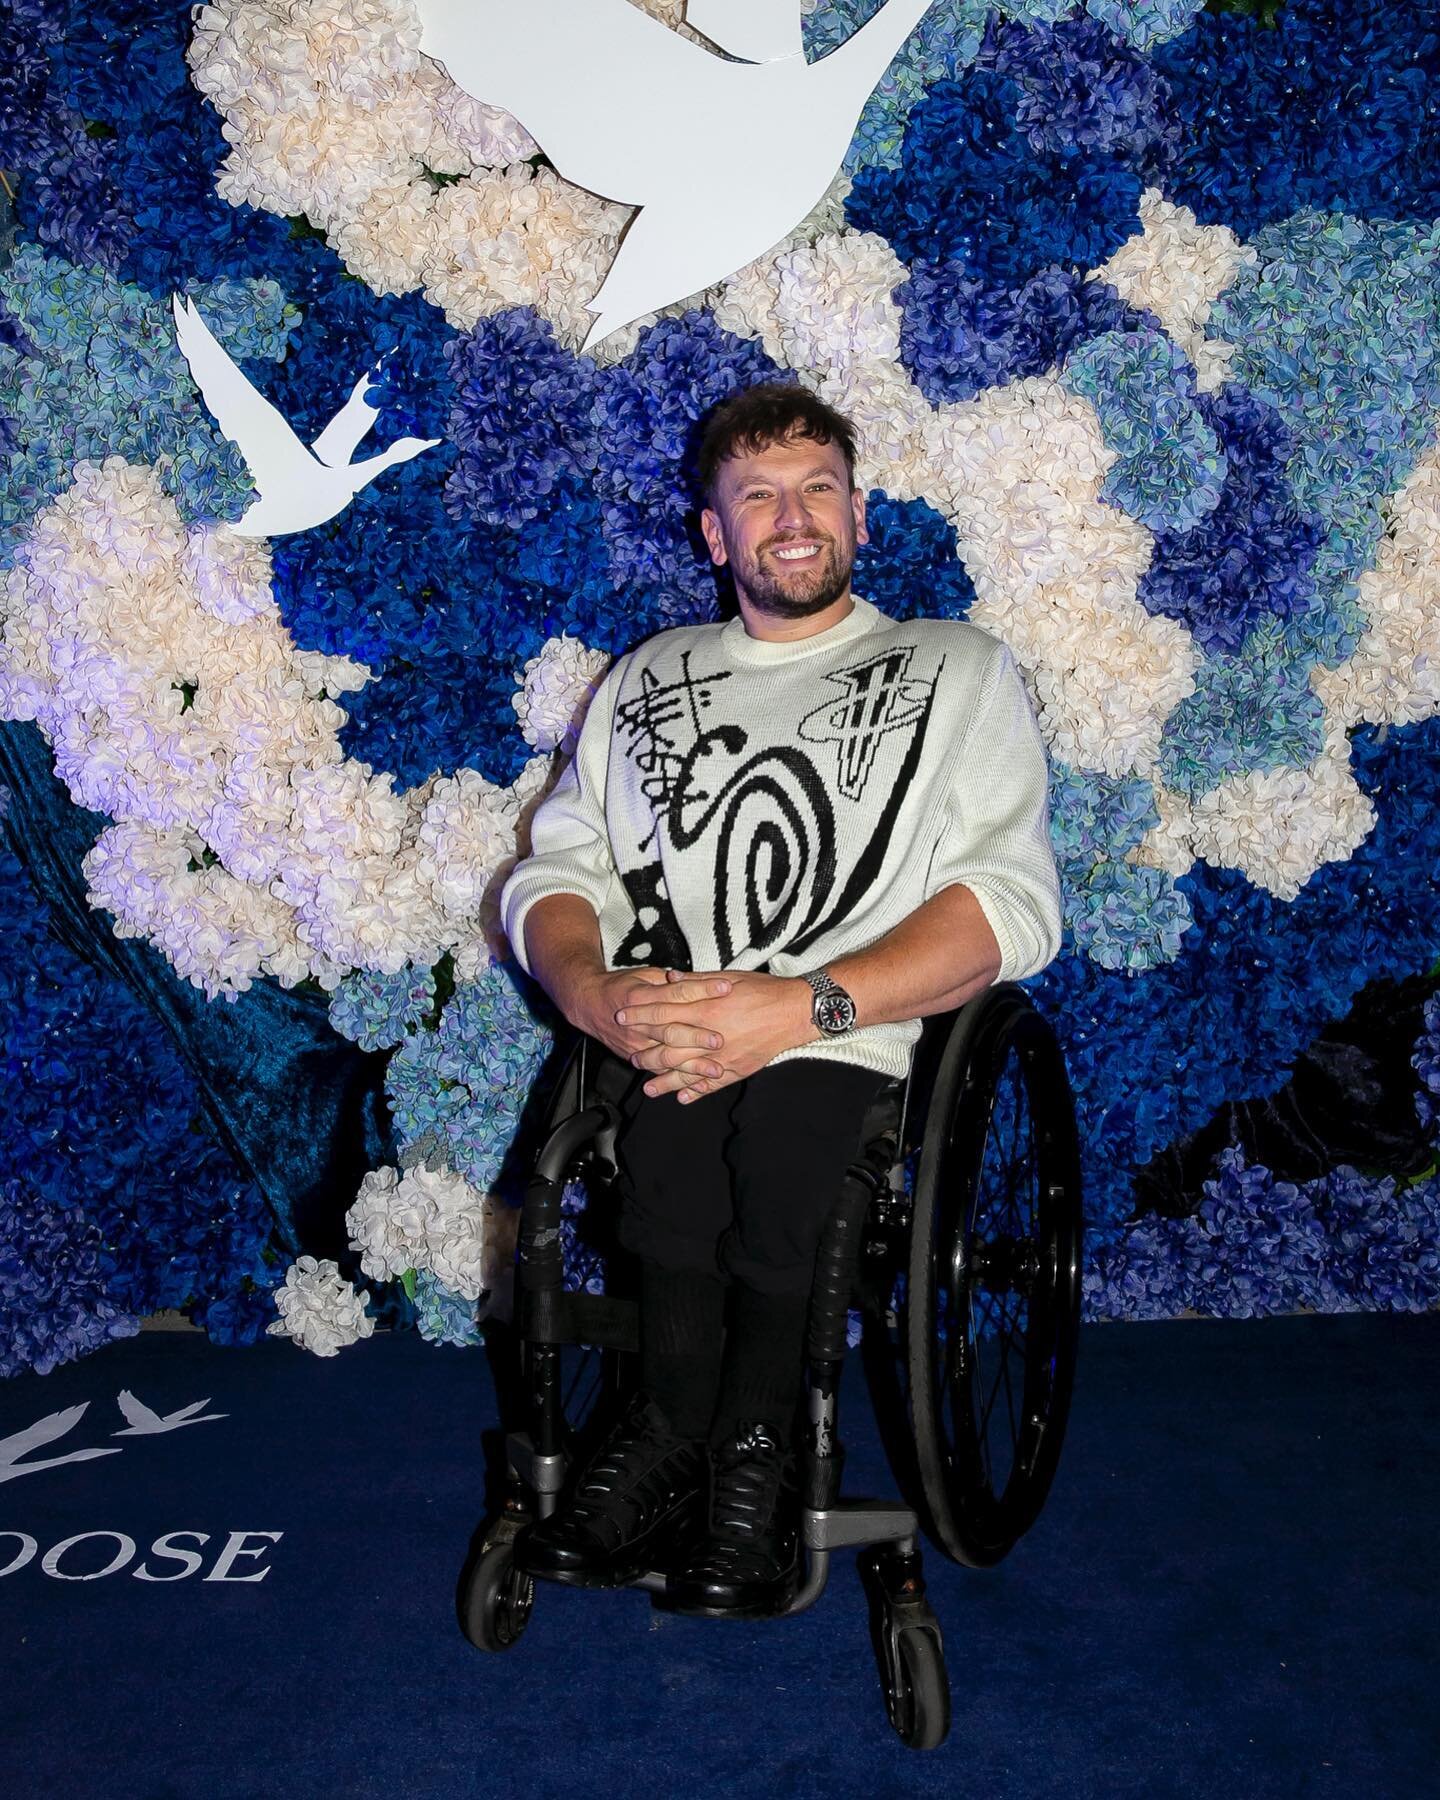 An Evening of Elegance and Star Power: Our @GreyGoose Spring Soiree with @ChanceTheRapper at The Calyx in the Royal Botanical Gardens brought together a constellation of talent and style, featuring luminaries like Dylan Alcott, Amy Castano, Aaron Eva